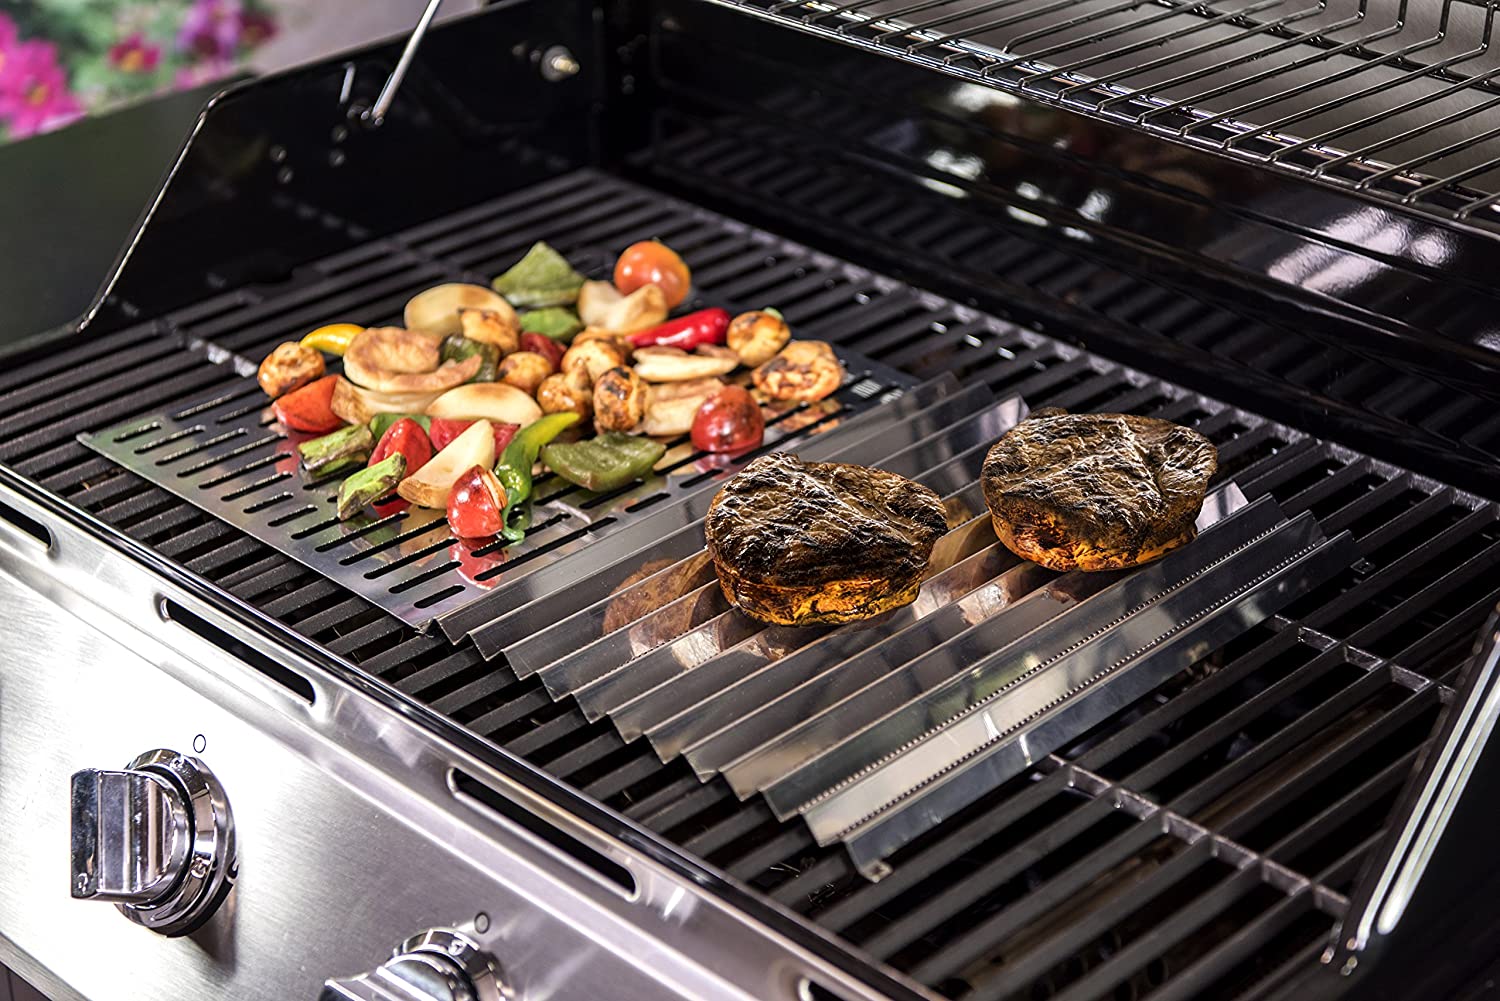 2-Pack Char-Broil Reusable Stainless Steel Toppers $4.19 @ Amazon